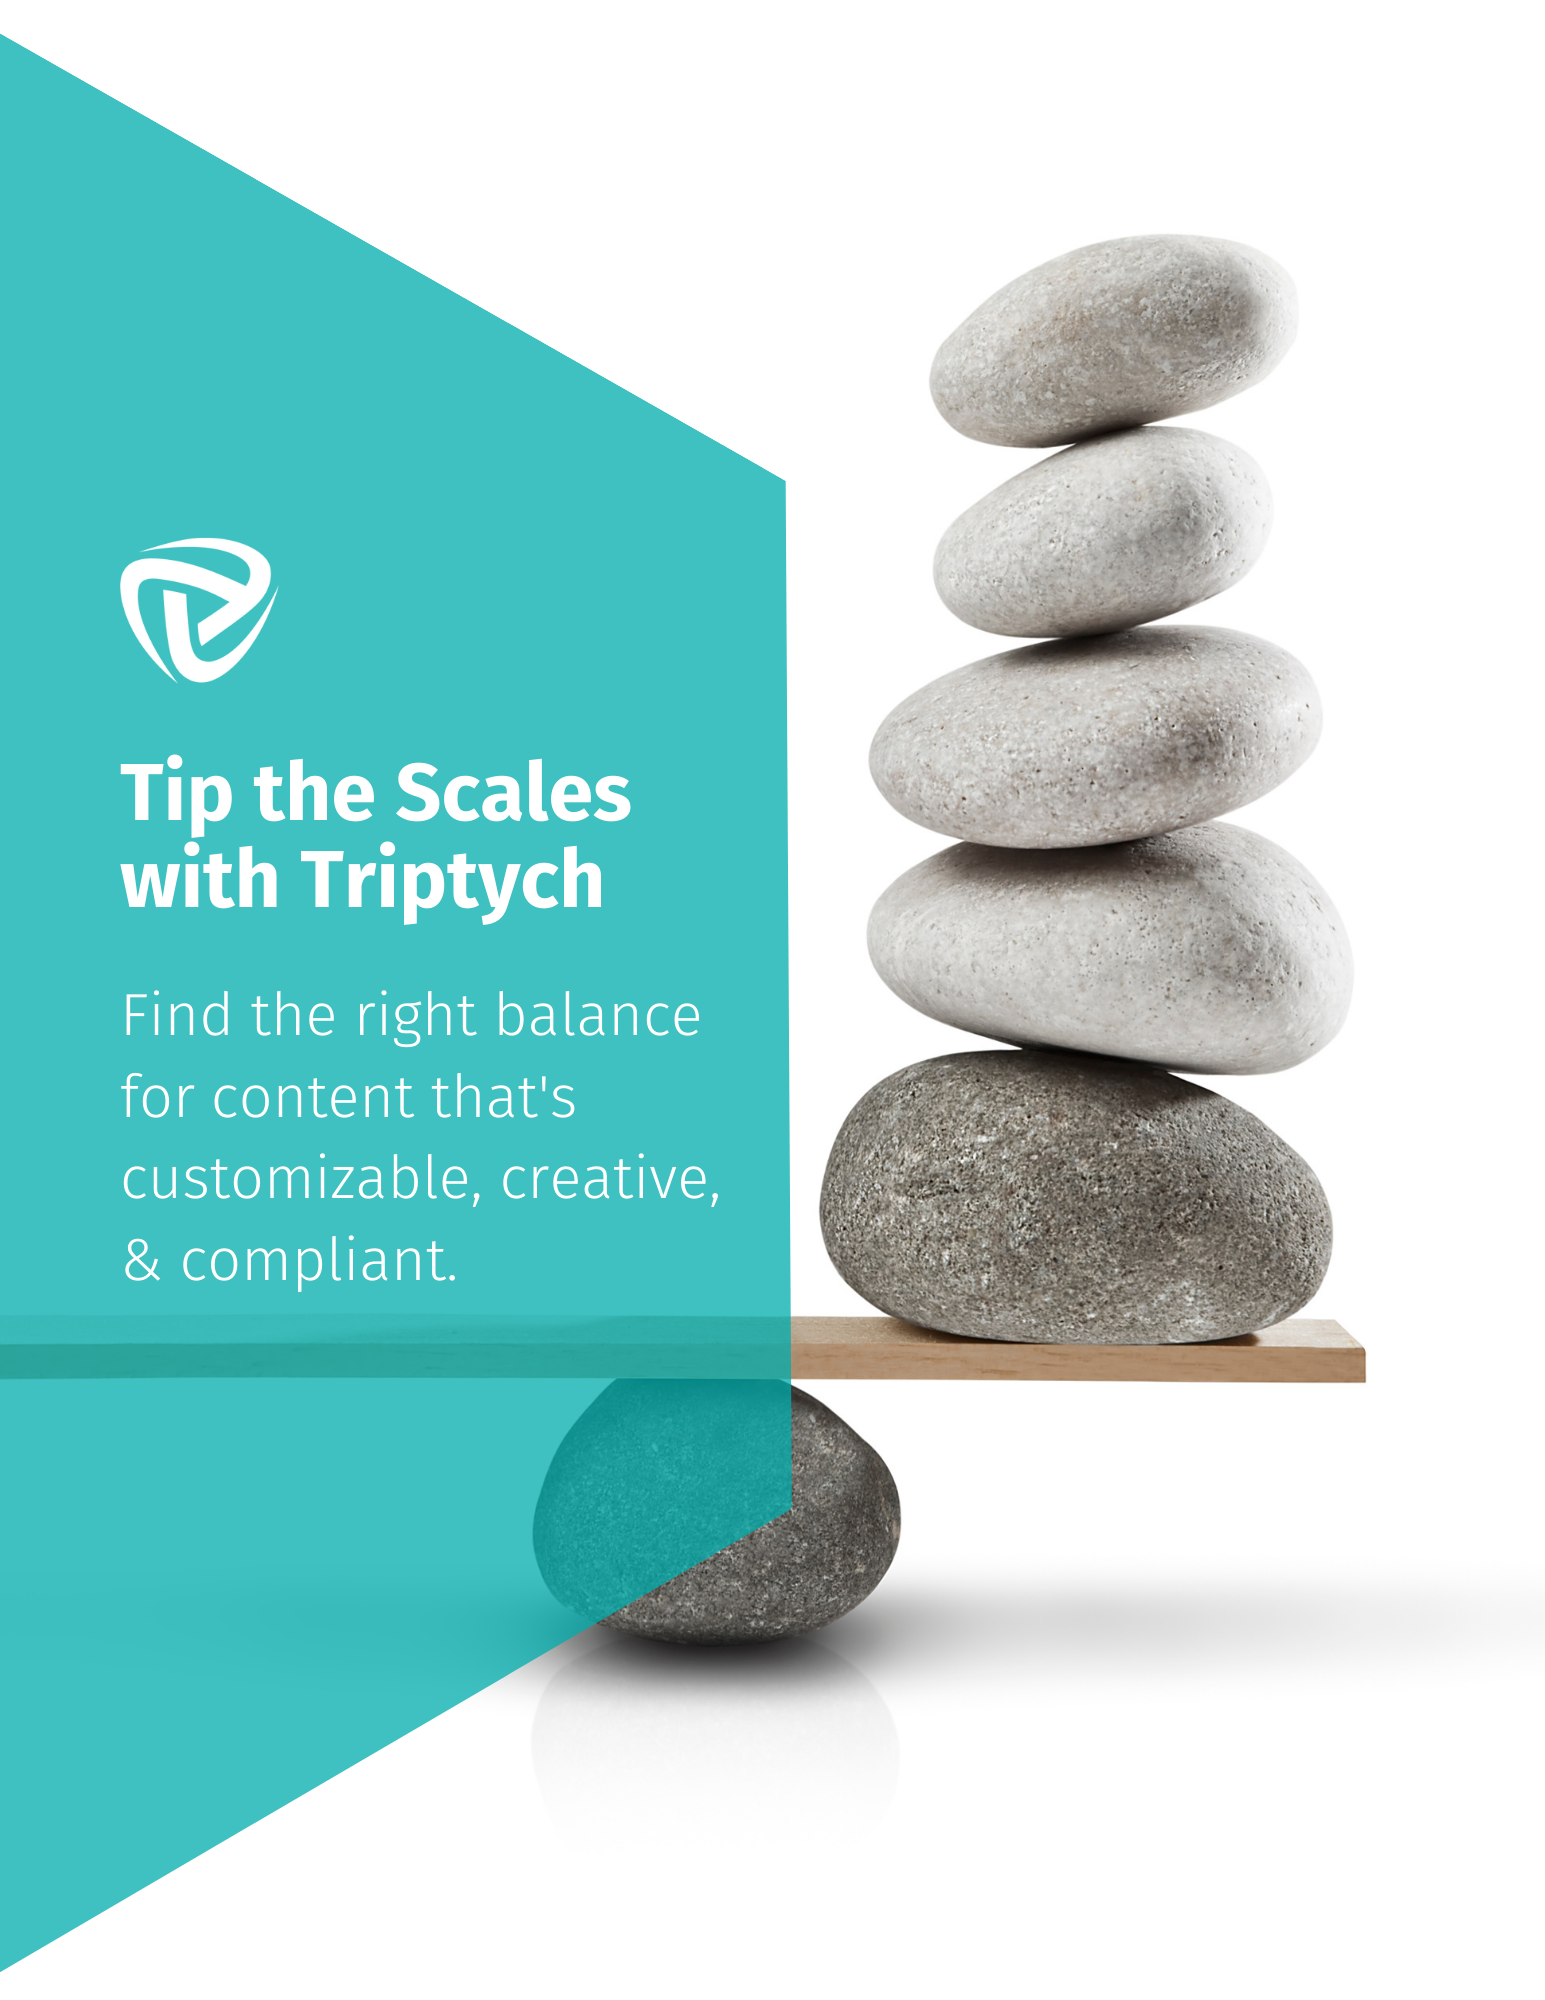 General Tip-the-scales-w-Triptych